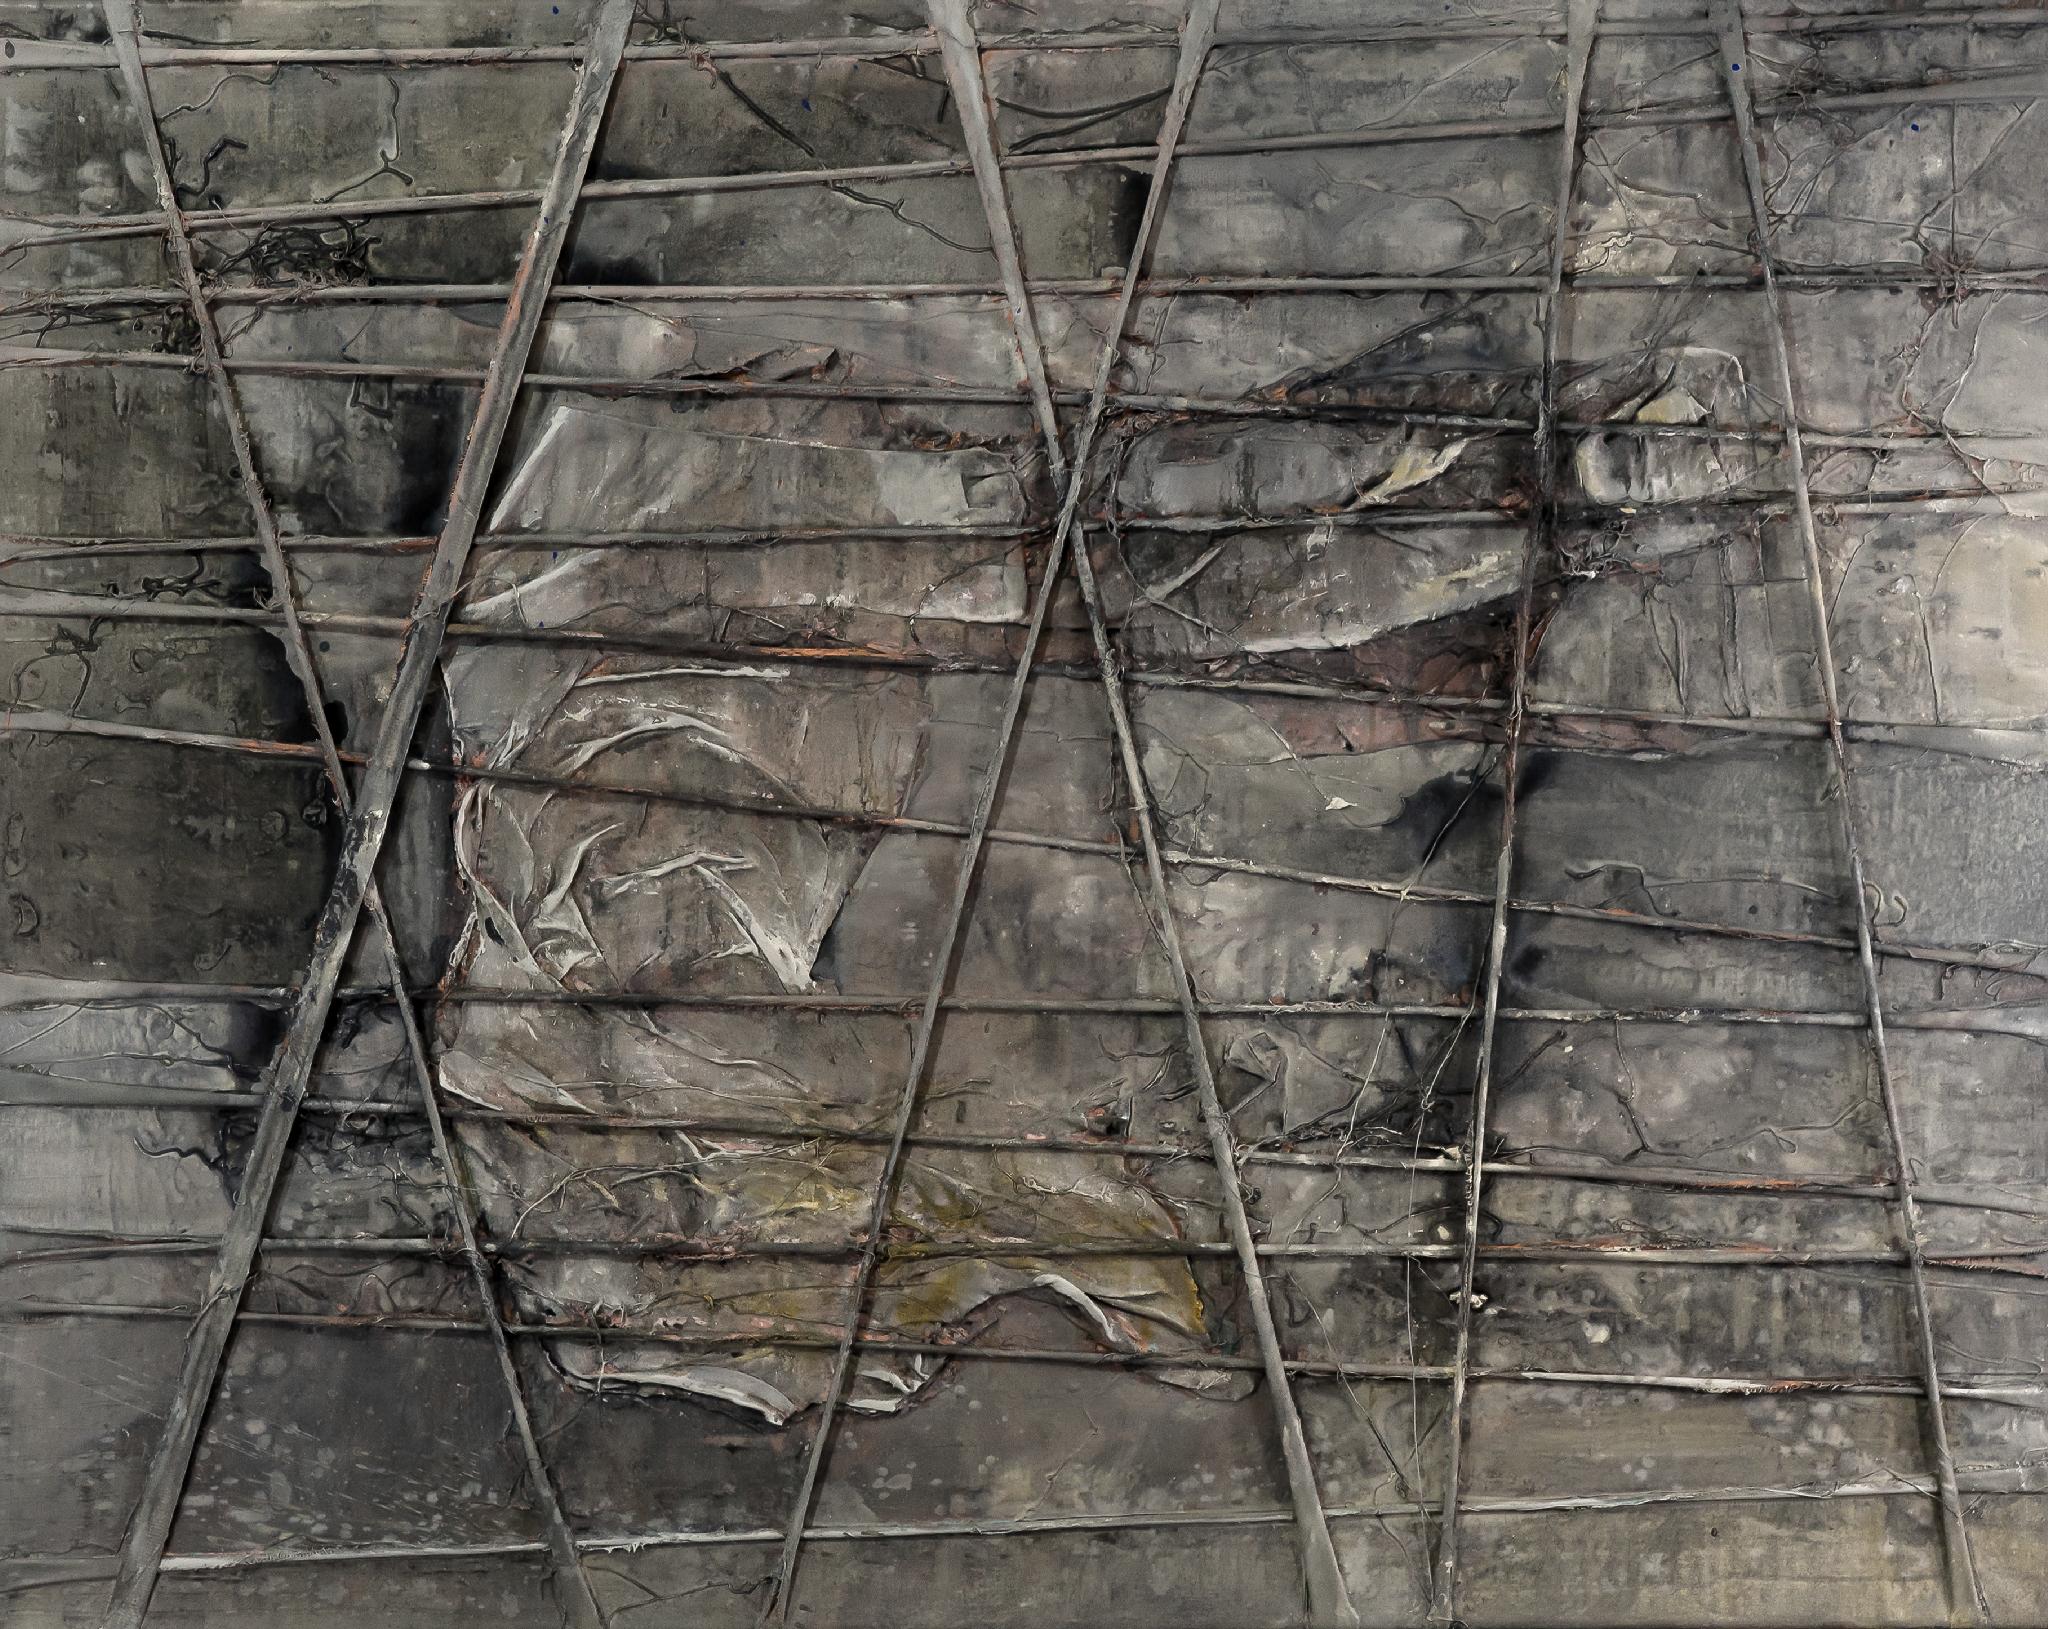 Plenty of Grey, 2013
Mixed technique: oil on canvas
(Signed on reverse)
31.49 H x 39.37 W in
80 H x 100 W cm

MASCH's work describes a discursive rebellion of continuous civilization in a state of decay. His paintings arise from the overlapping of